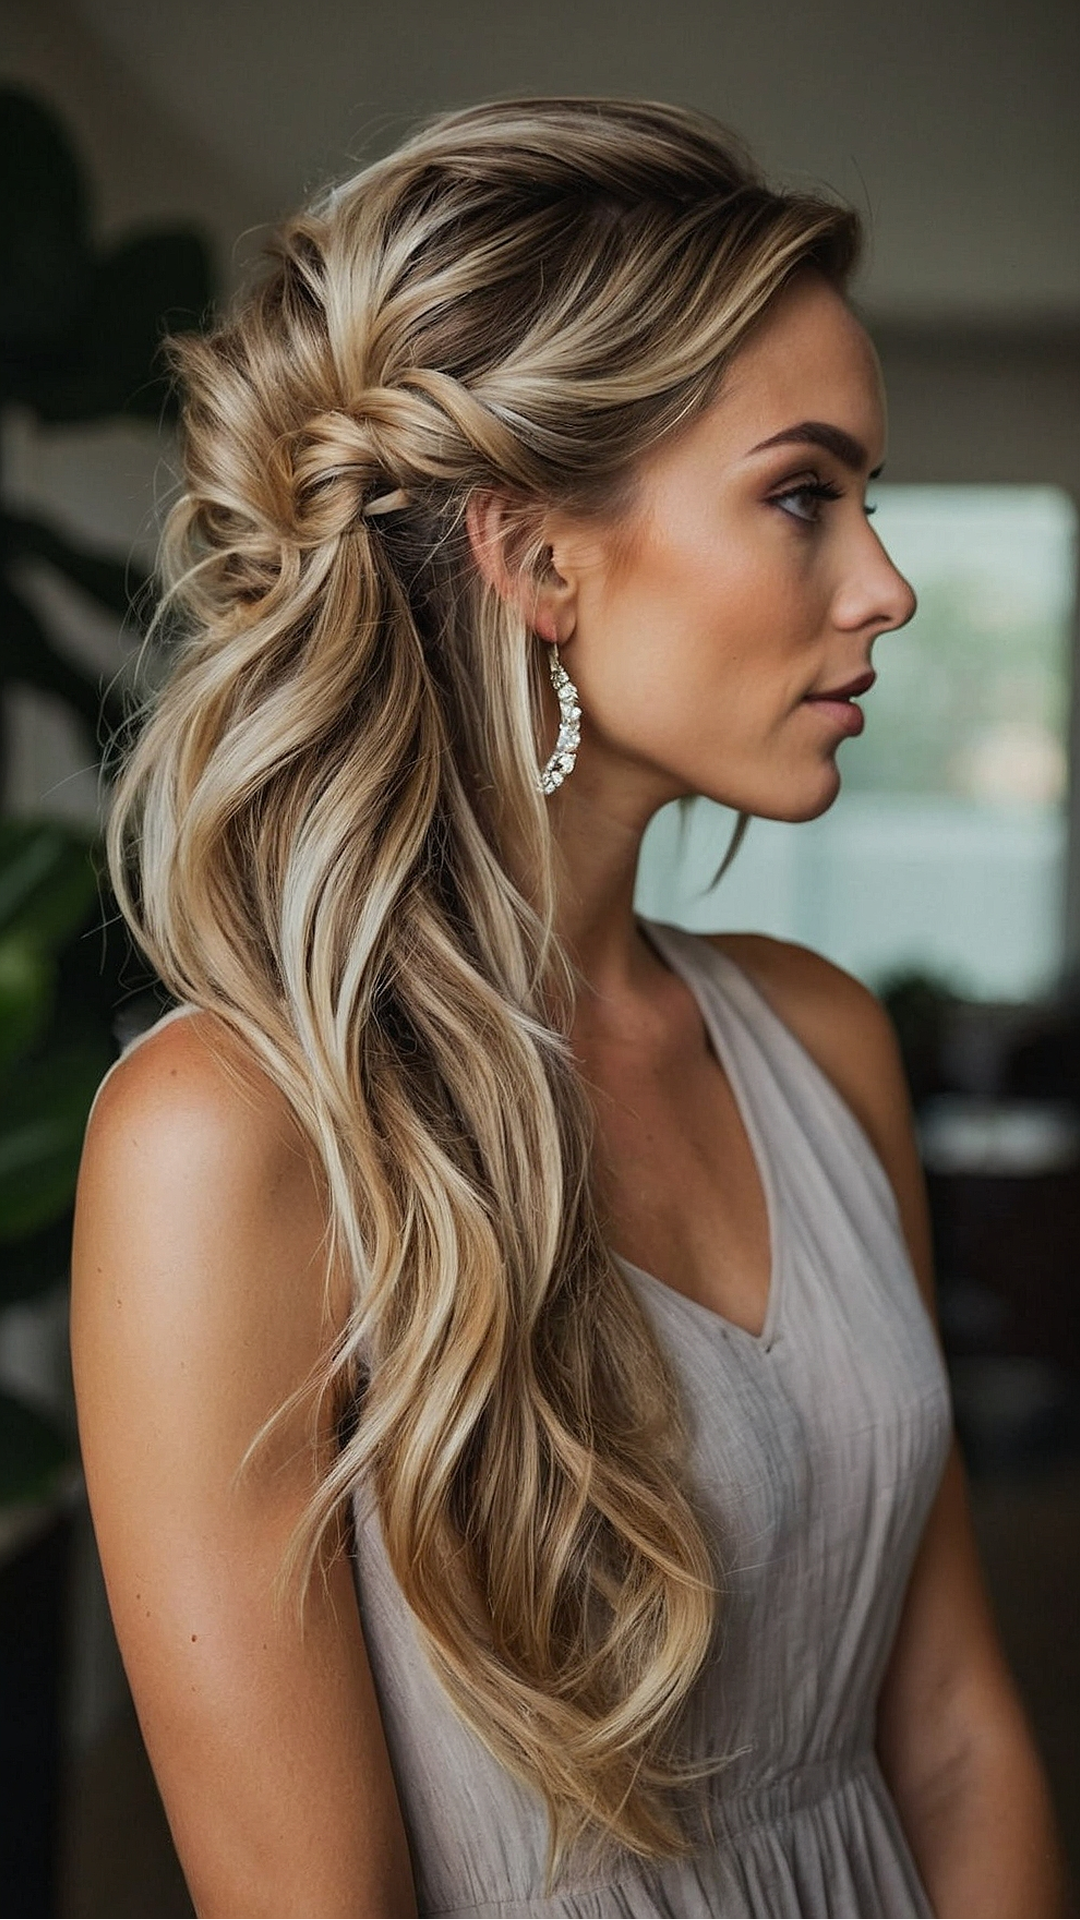 Sunset Stunners: Captivating Summer Hairstyles to Elevate Your Look